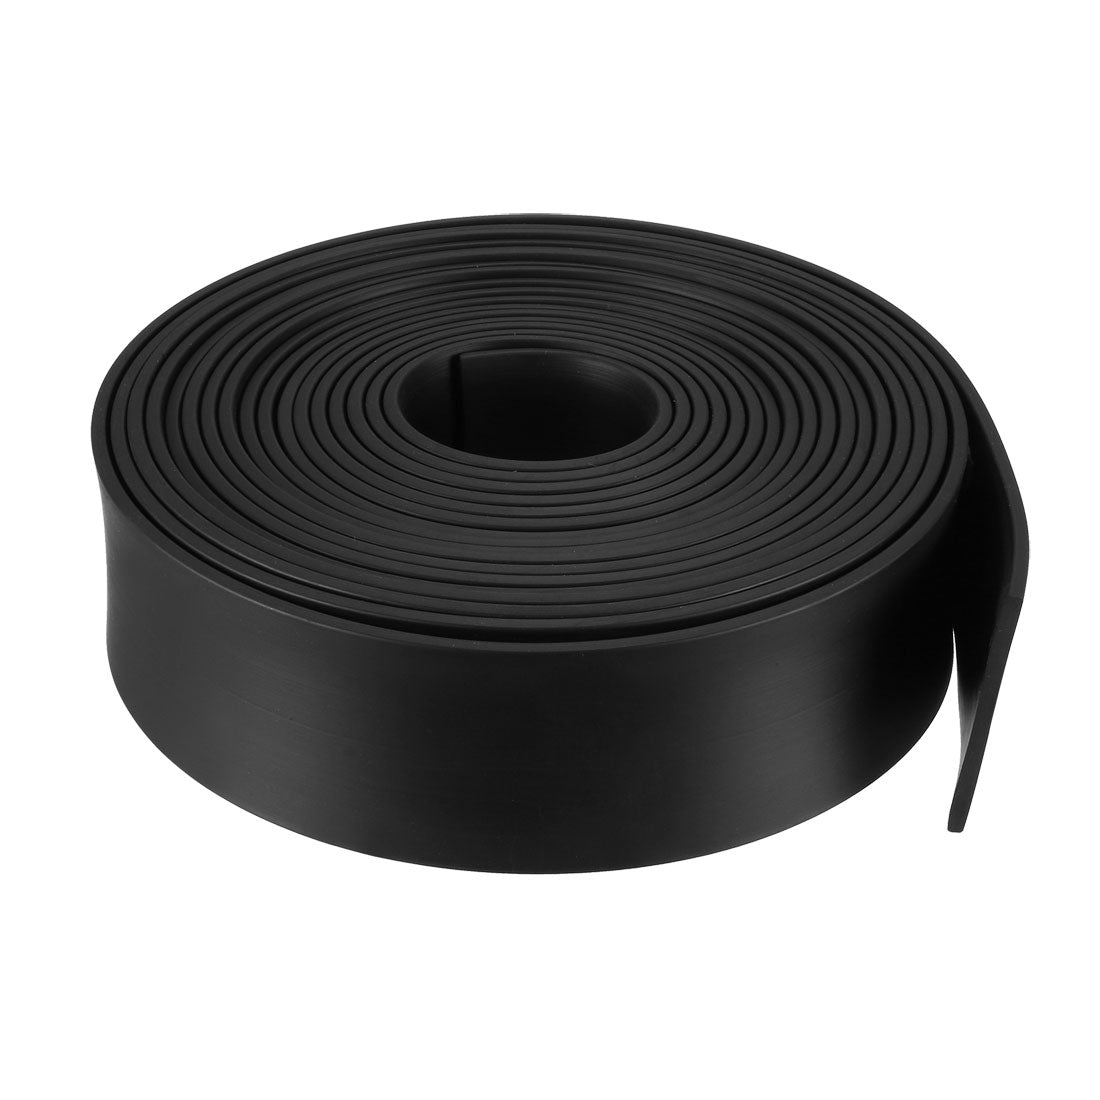 uxcell Uxcell Solid Rectangle Rubber Seal Strip 10mm Wide 5mm Thick, 3 Meters Long Black